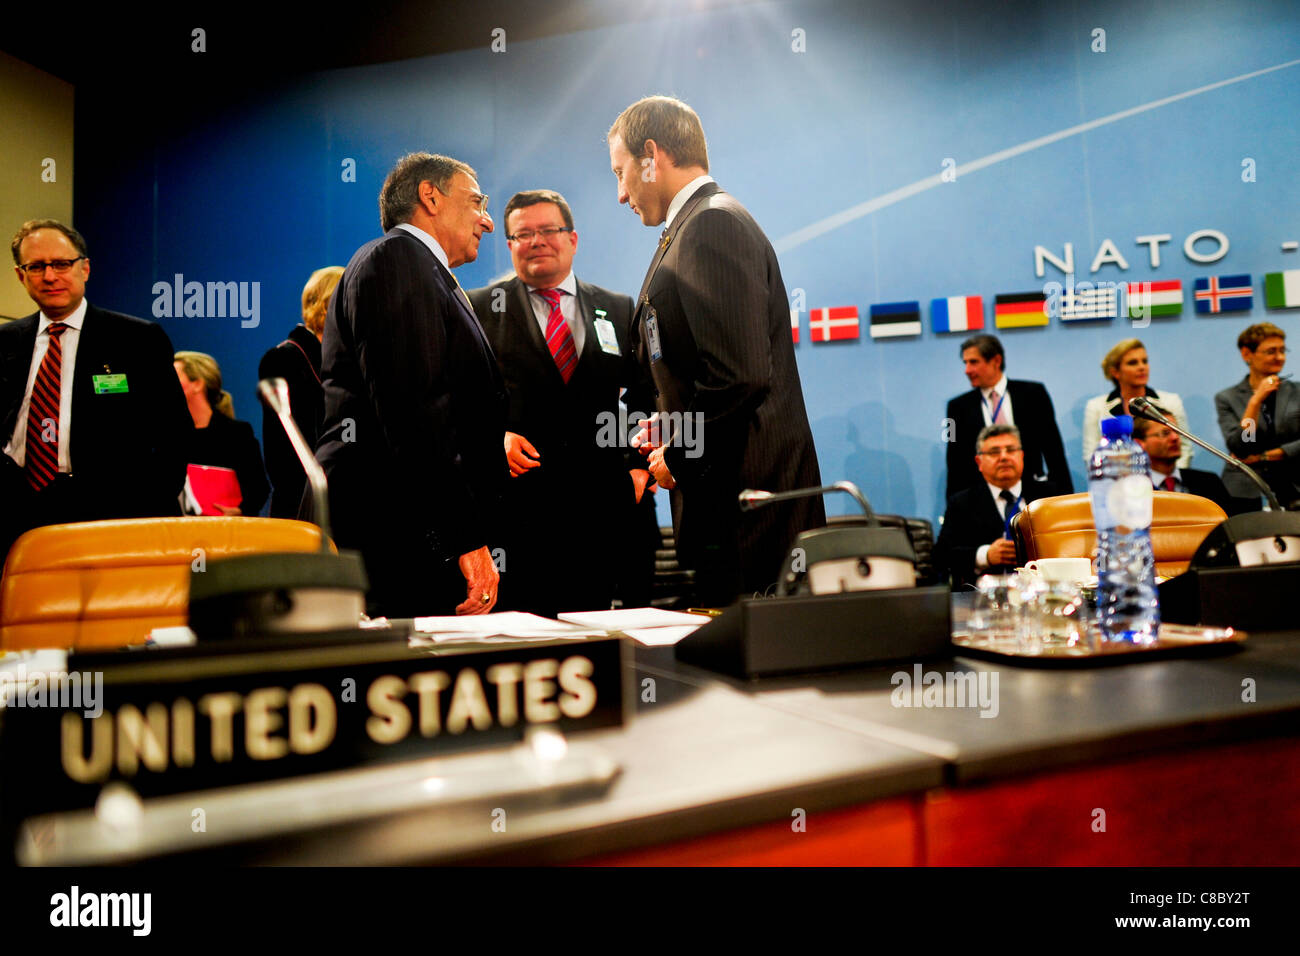 Defense Secretary Leon Panetta meets with counterparts at the NATO Defense Ministerial in Brussels, Belgium. Stock Photo